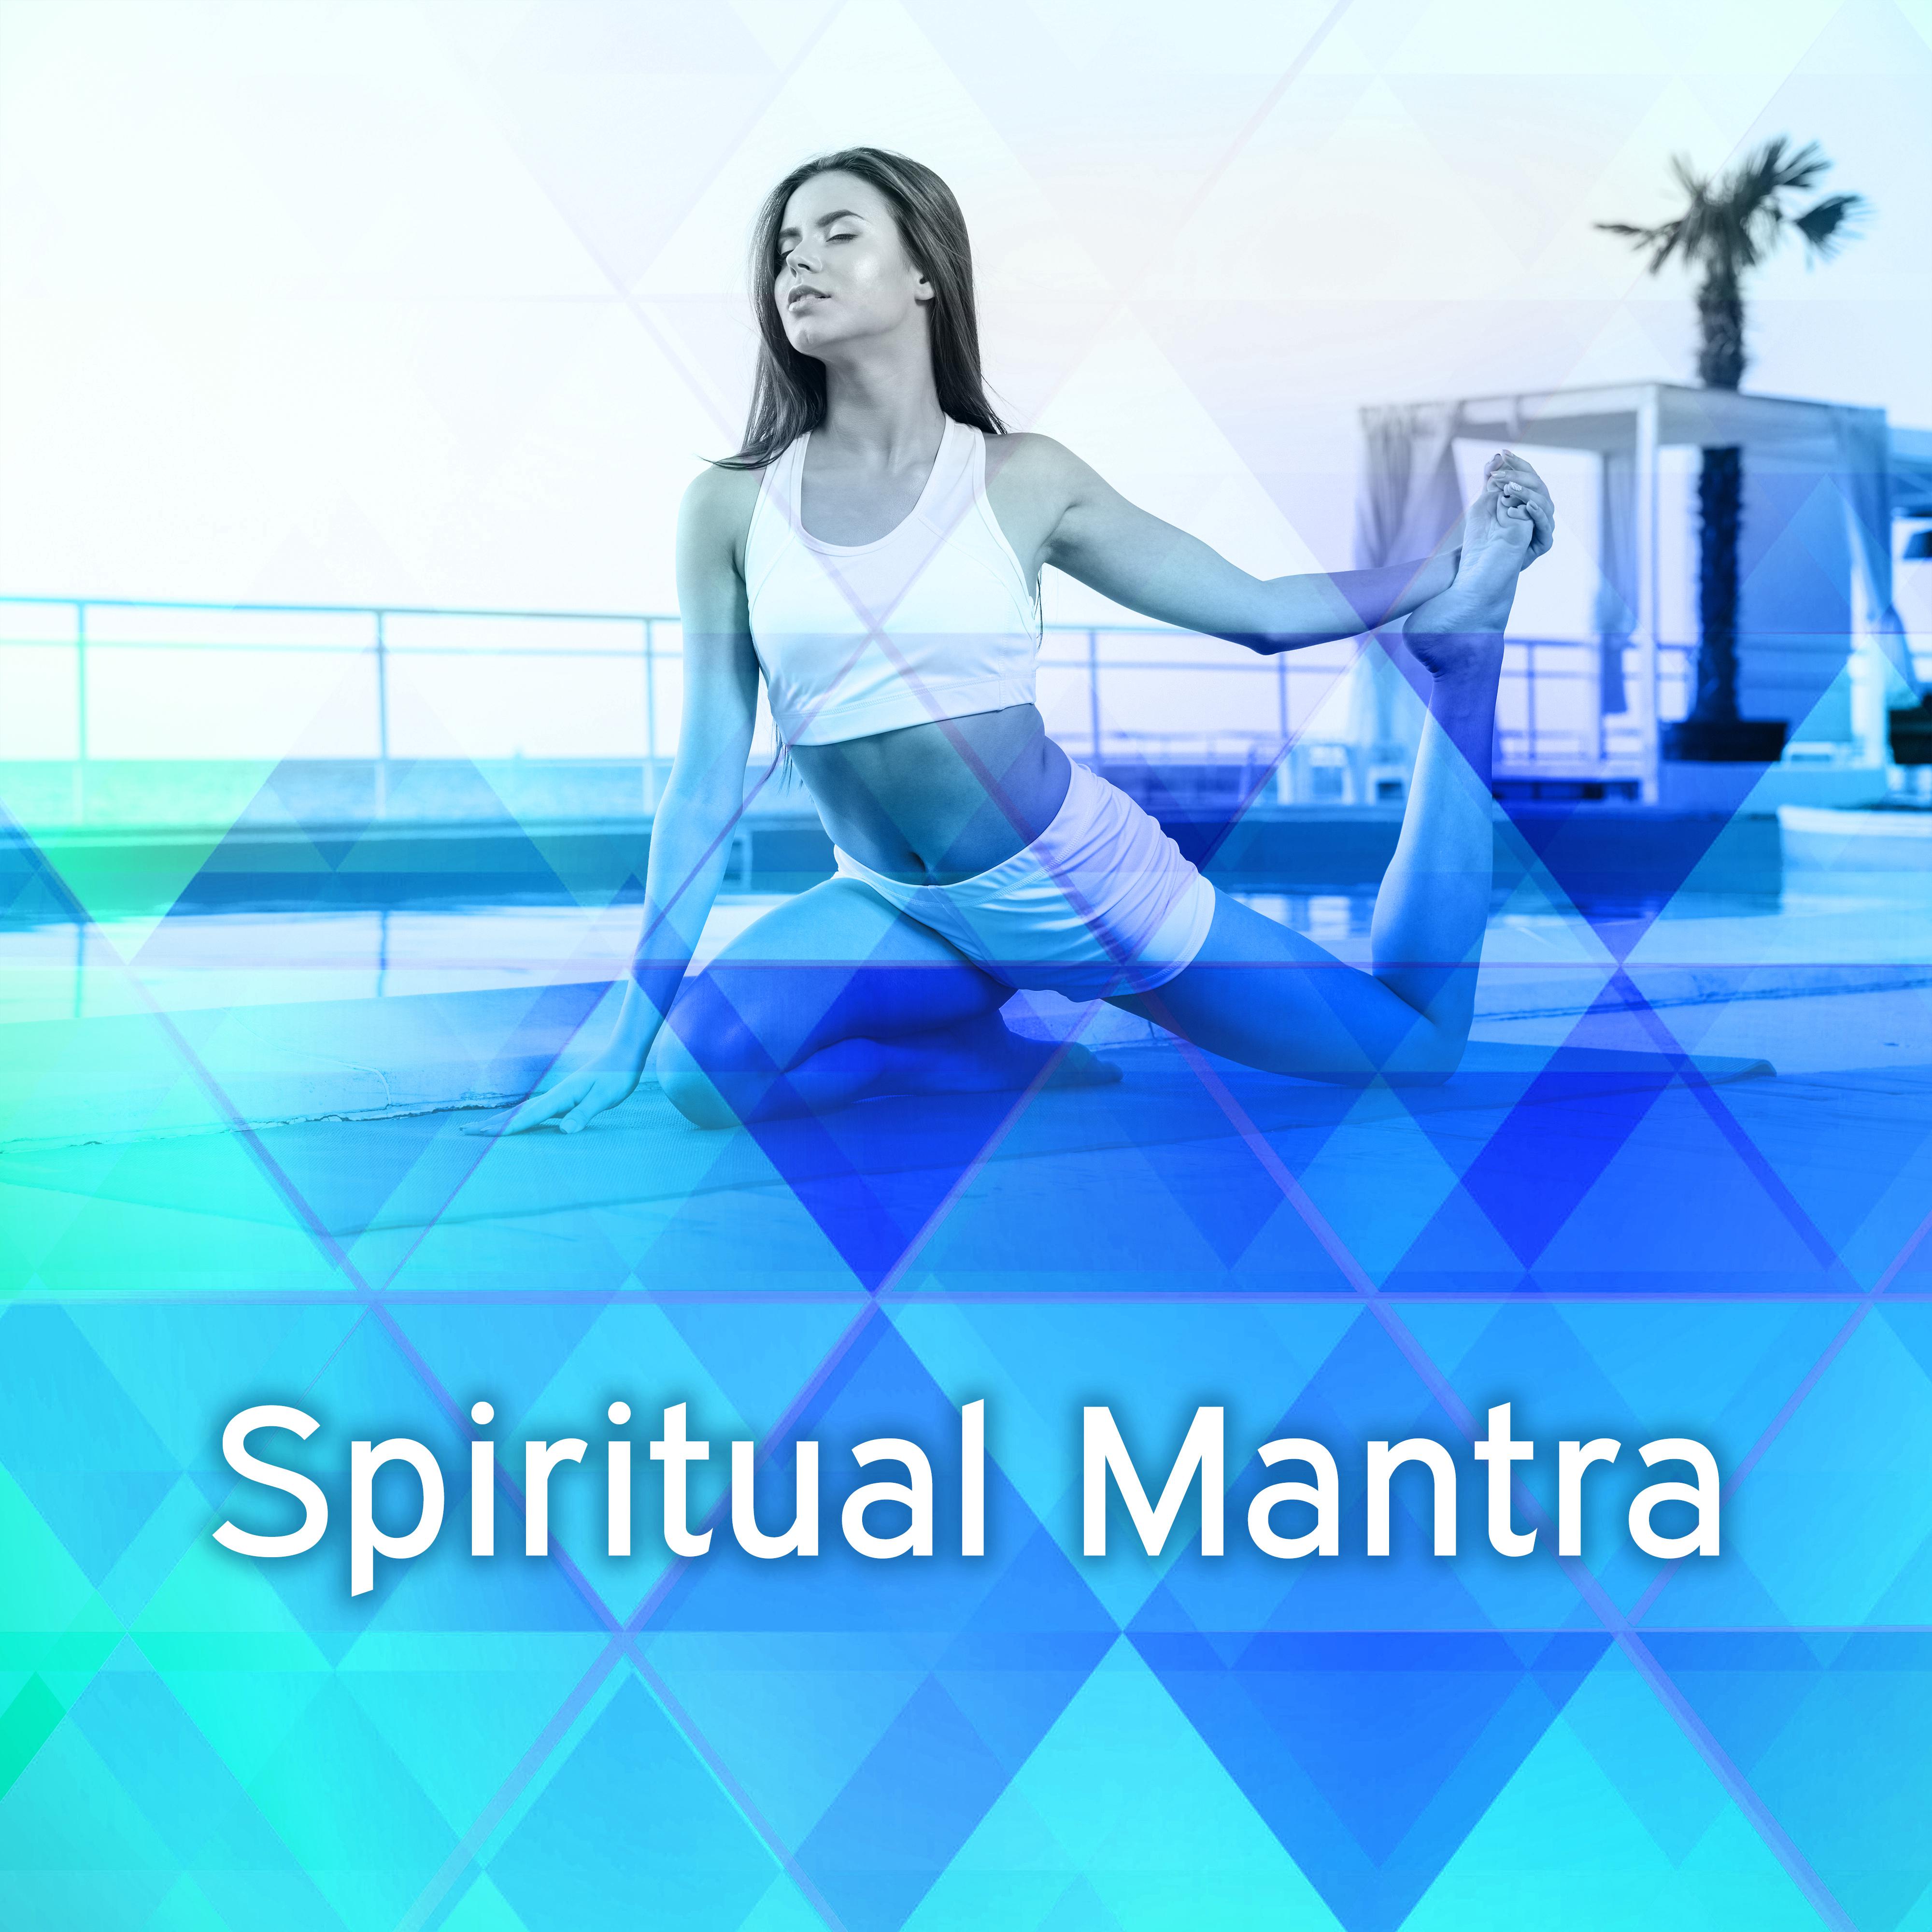 Spiritual Mantra – Meditation Music, Peaceful Mind, Harmony, Nature Sounds for Relaxation, Healing Music, Stress Relief, Calmness